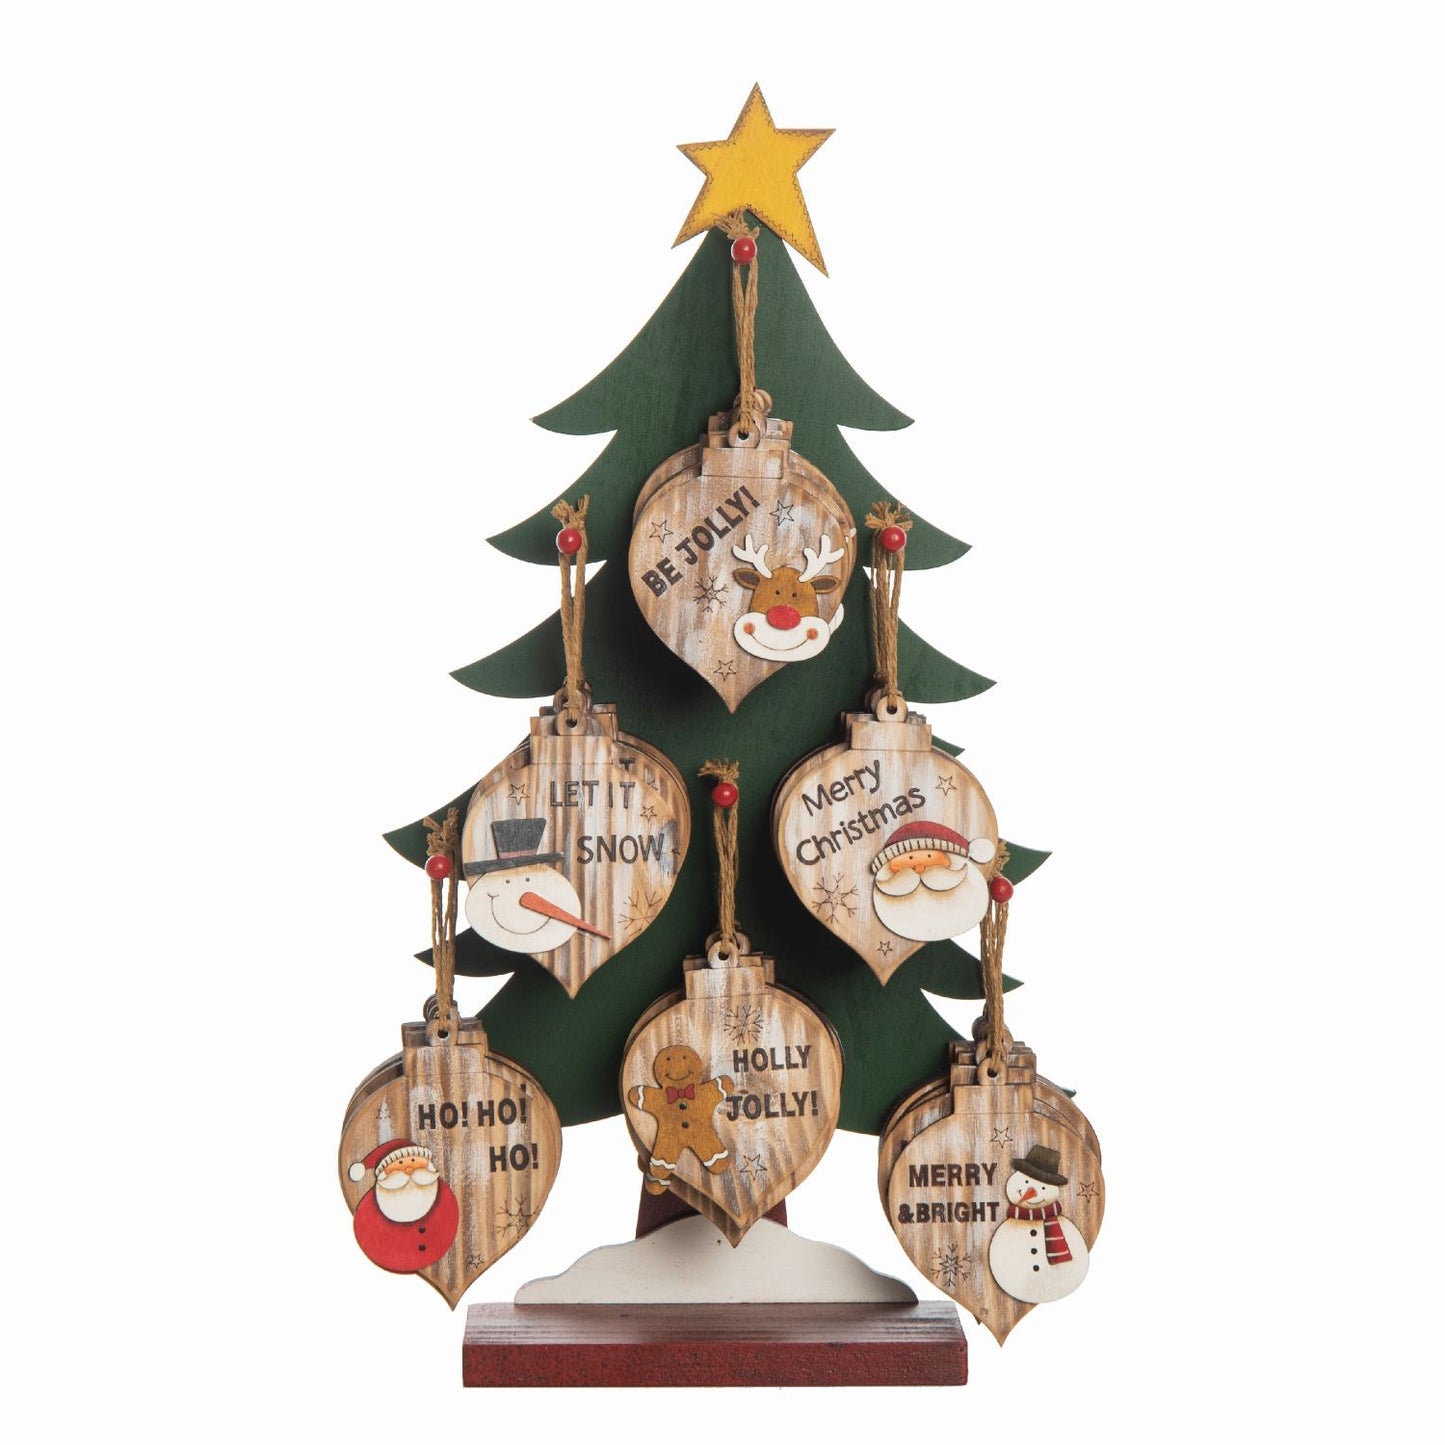 Transpac Plywood Rustic Christmas Ornaments With Tree Display, Set Of 36